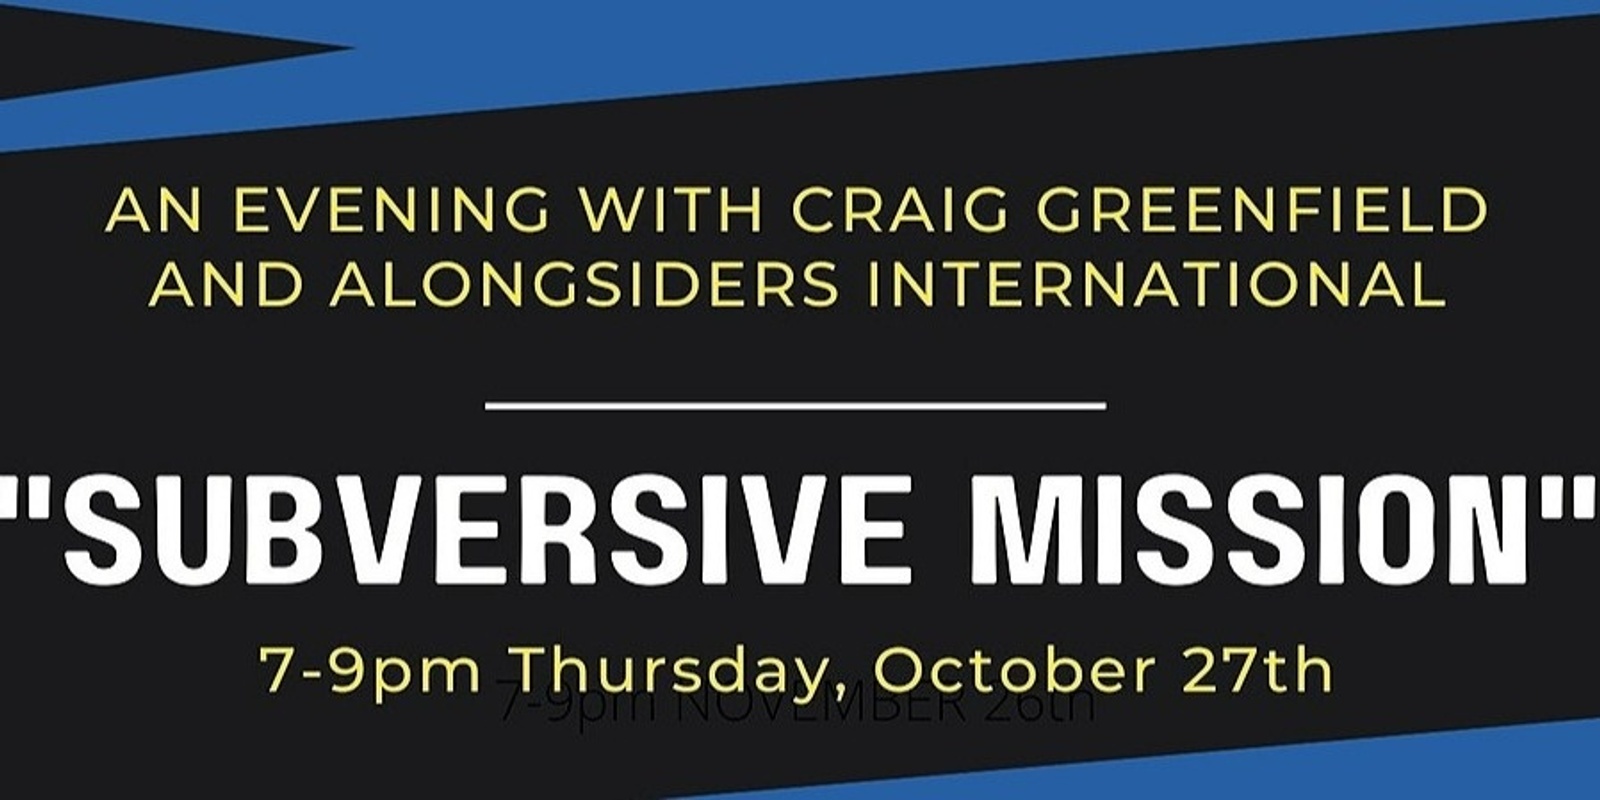 "Subversive Mission" - An Evening with Craig Greenfield and Alongsiders International